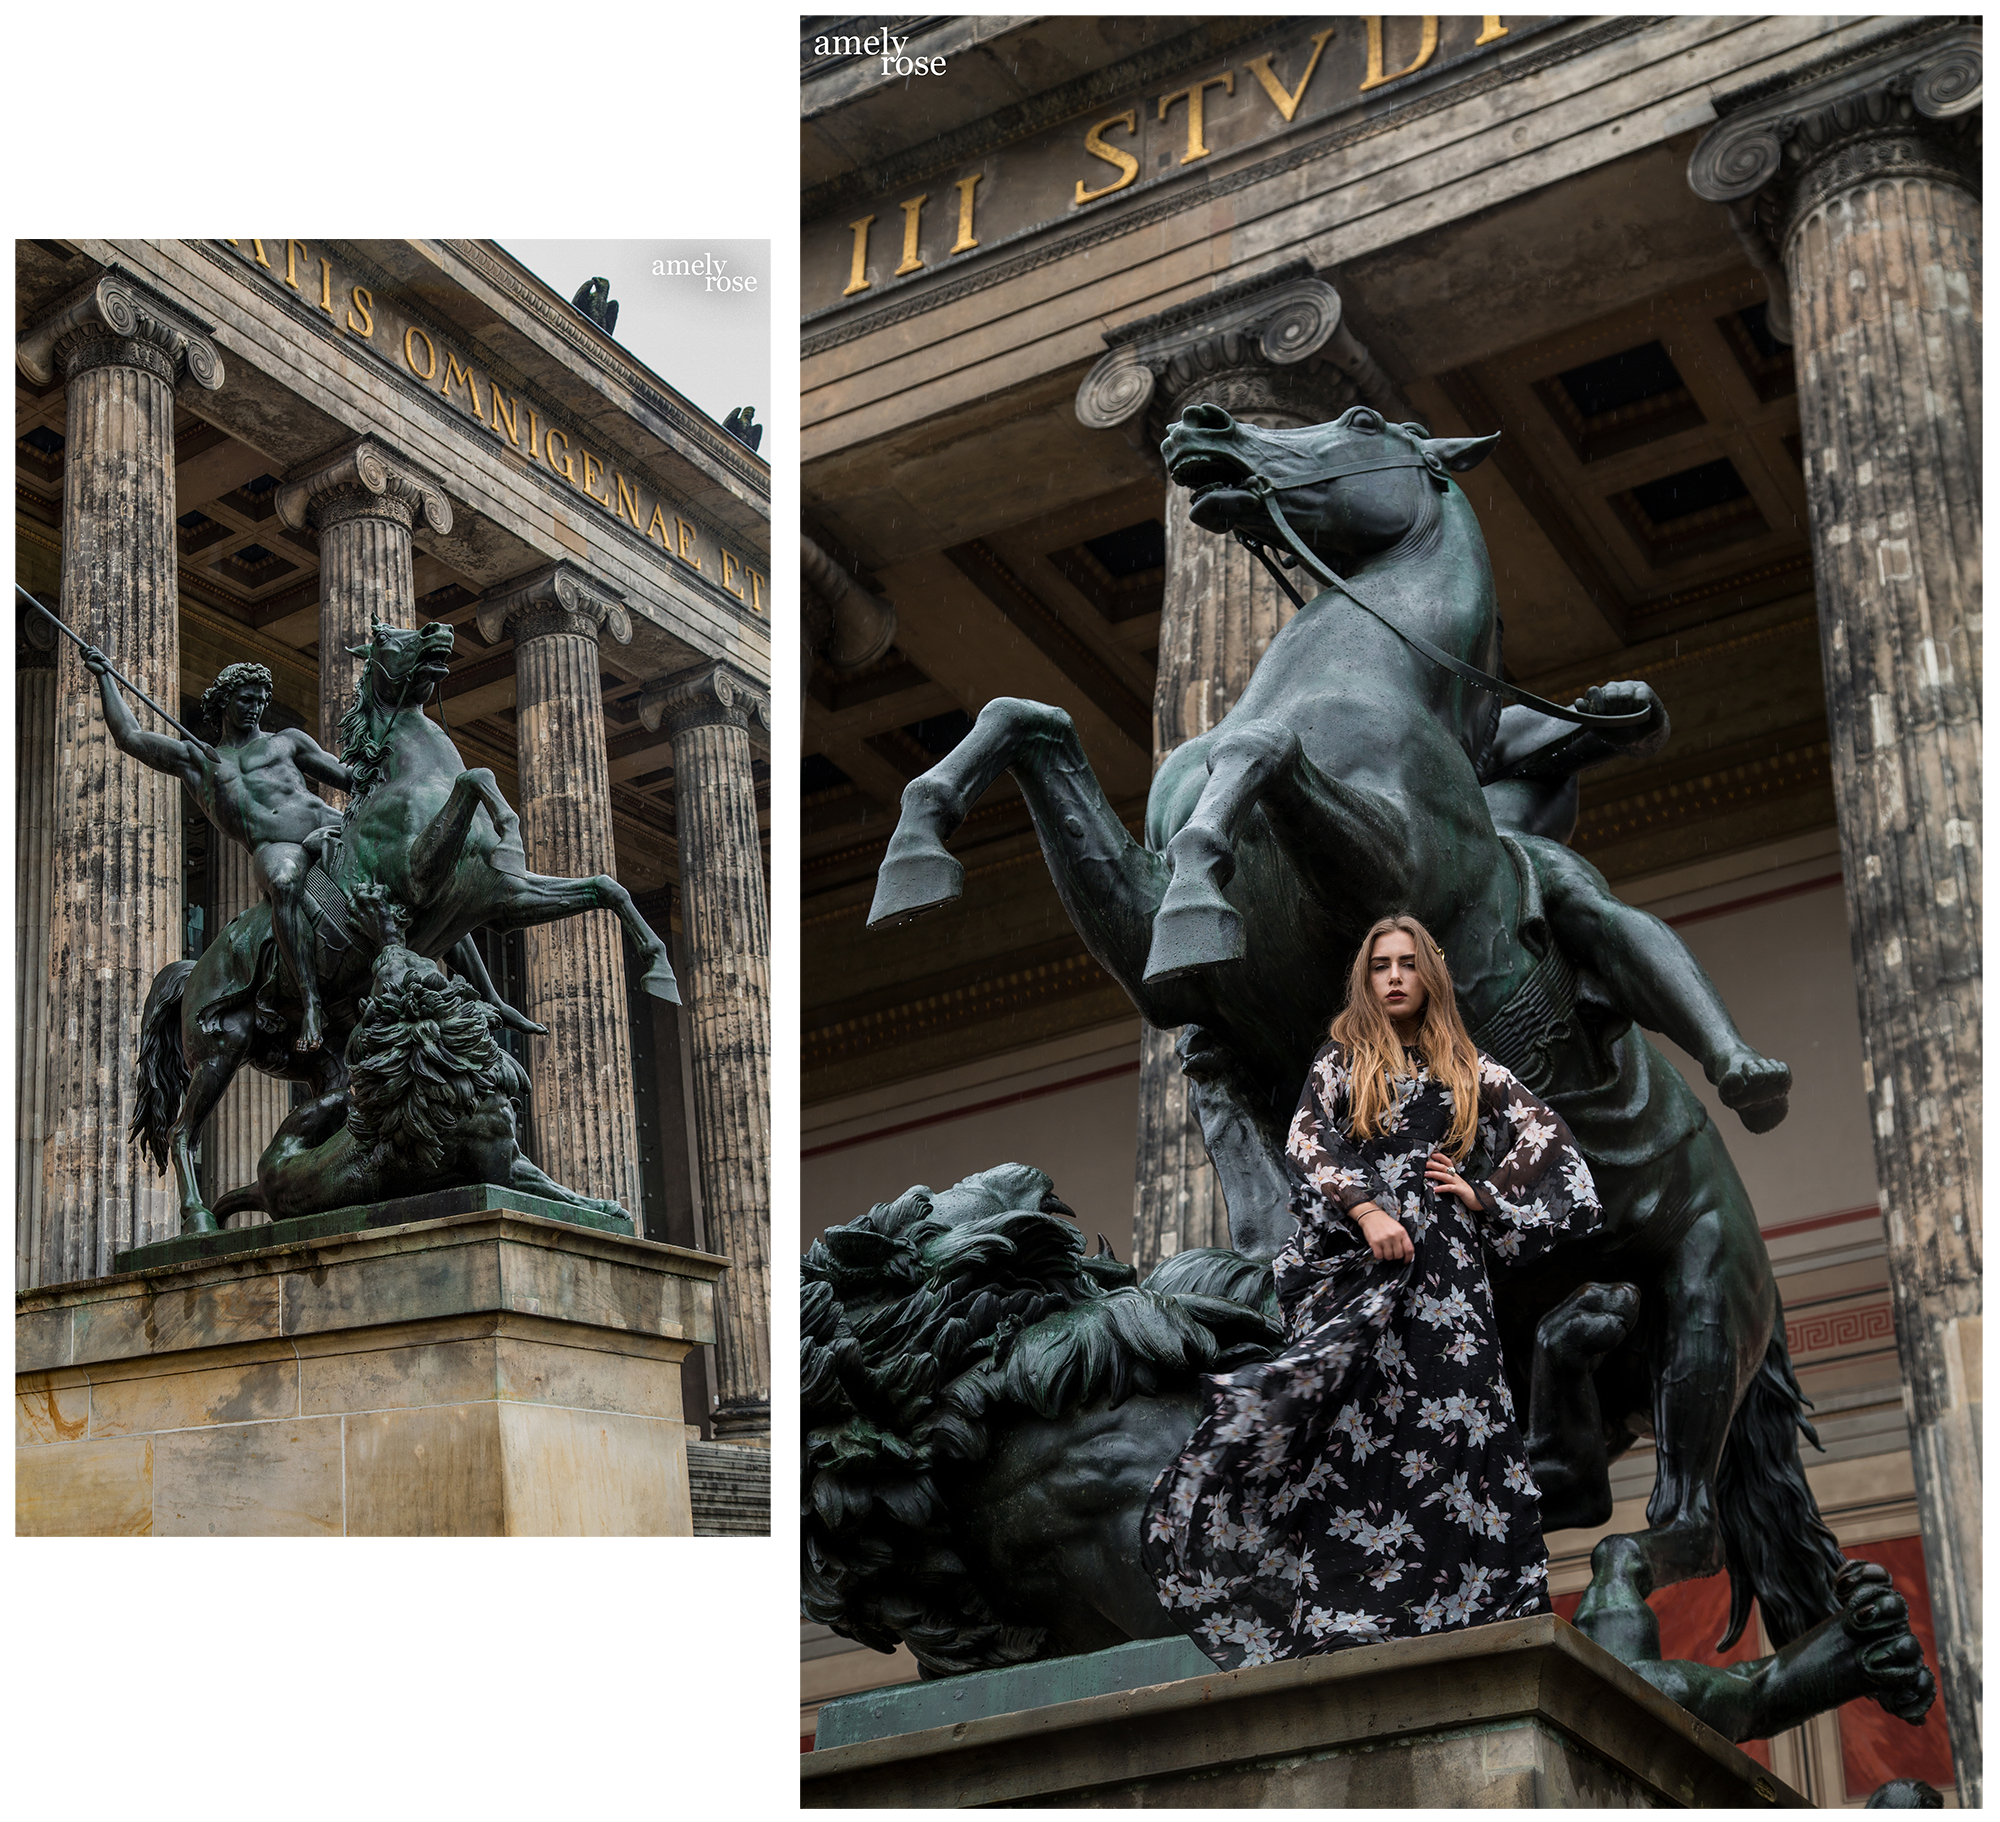 amely rose, fashionblogger in a classy maxidress in berlin - bw fashion editorial and photoshooting - statue